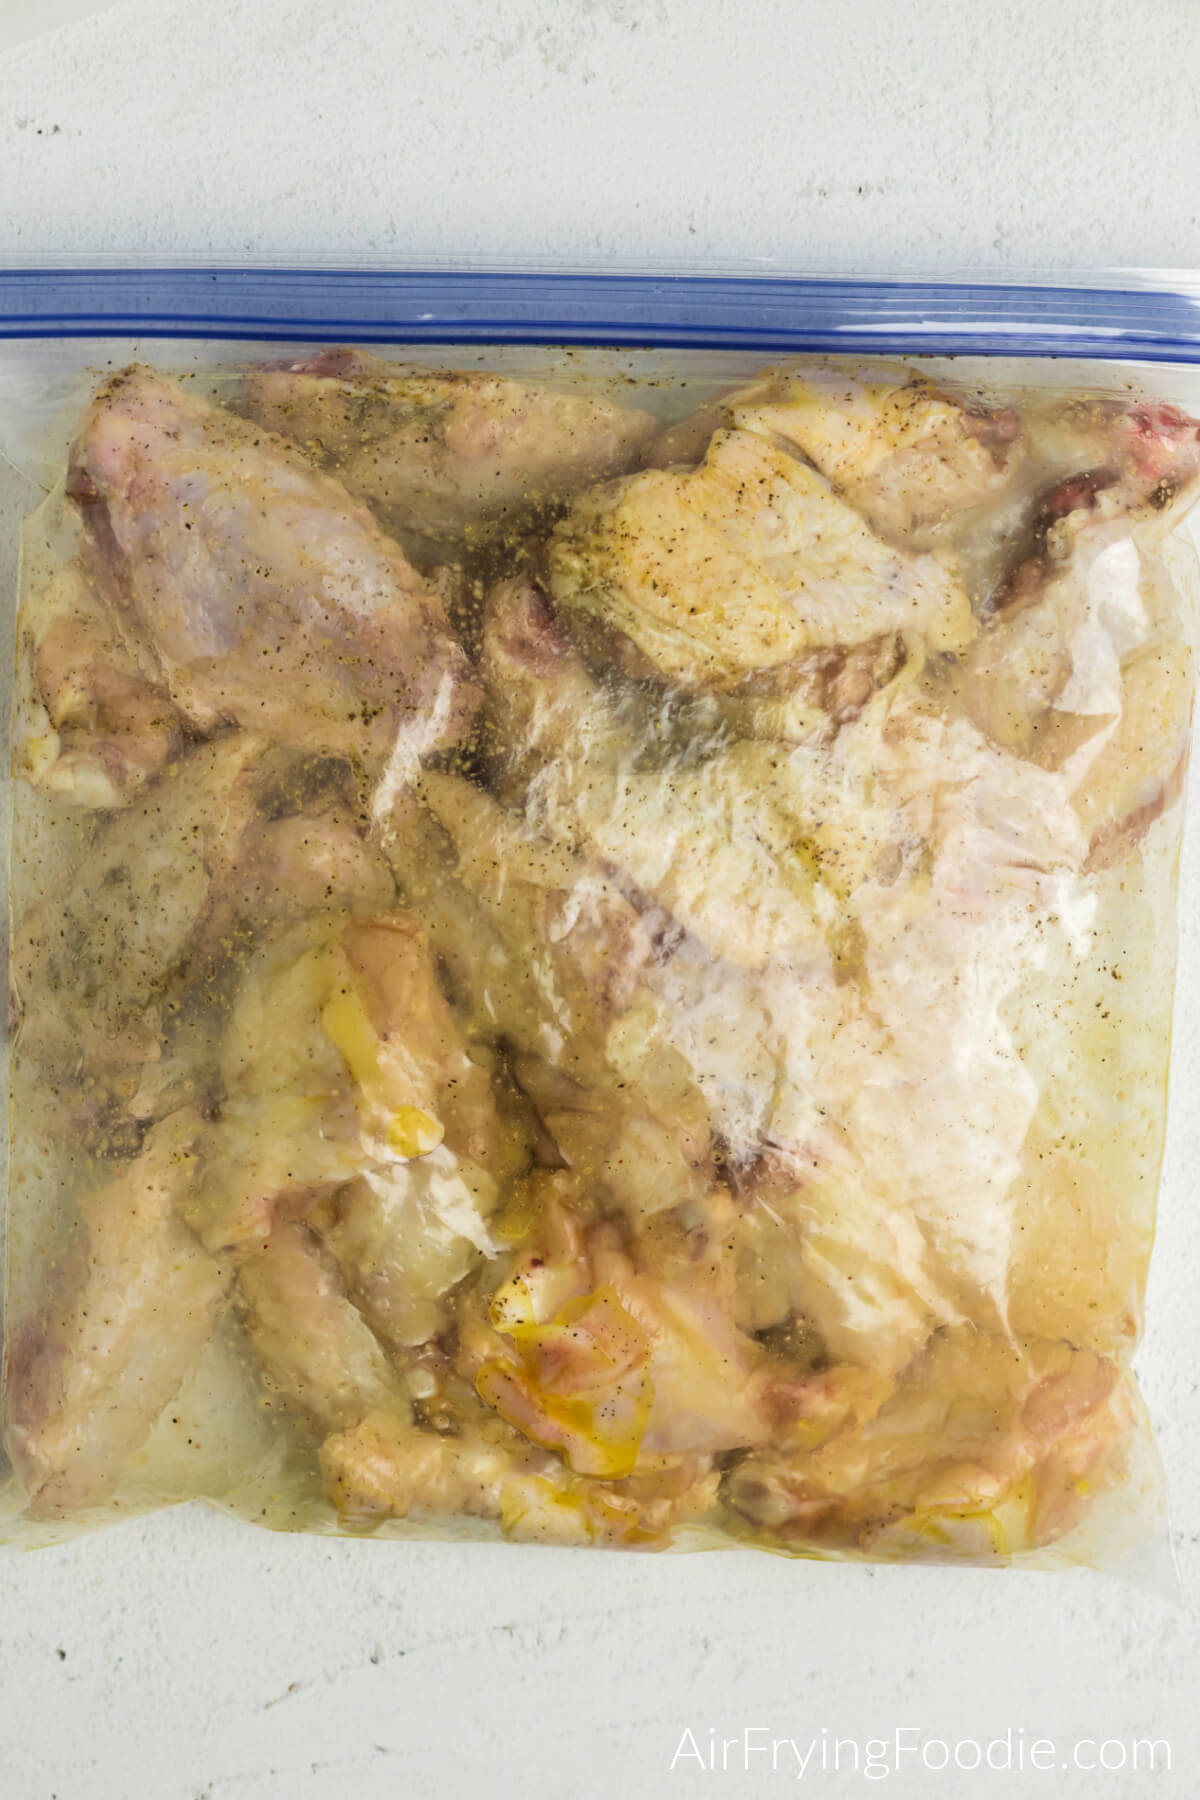 Cut up fresh wings in a plastic sealable bag with olive oil and seasonings. 